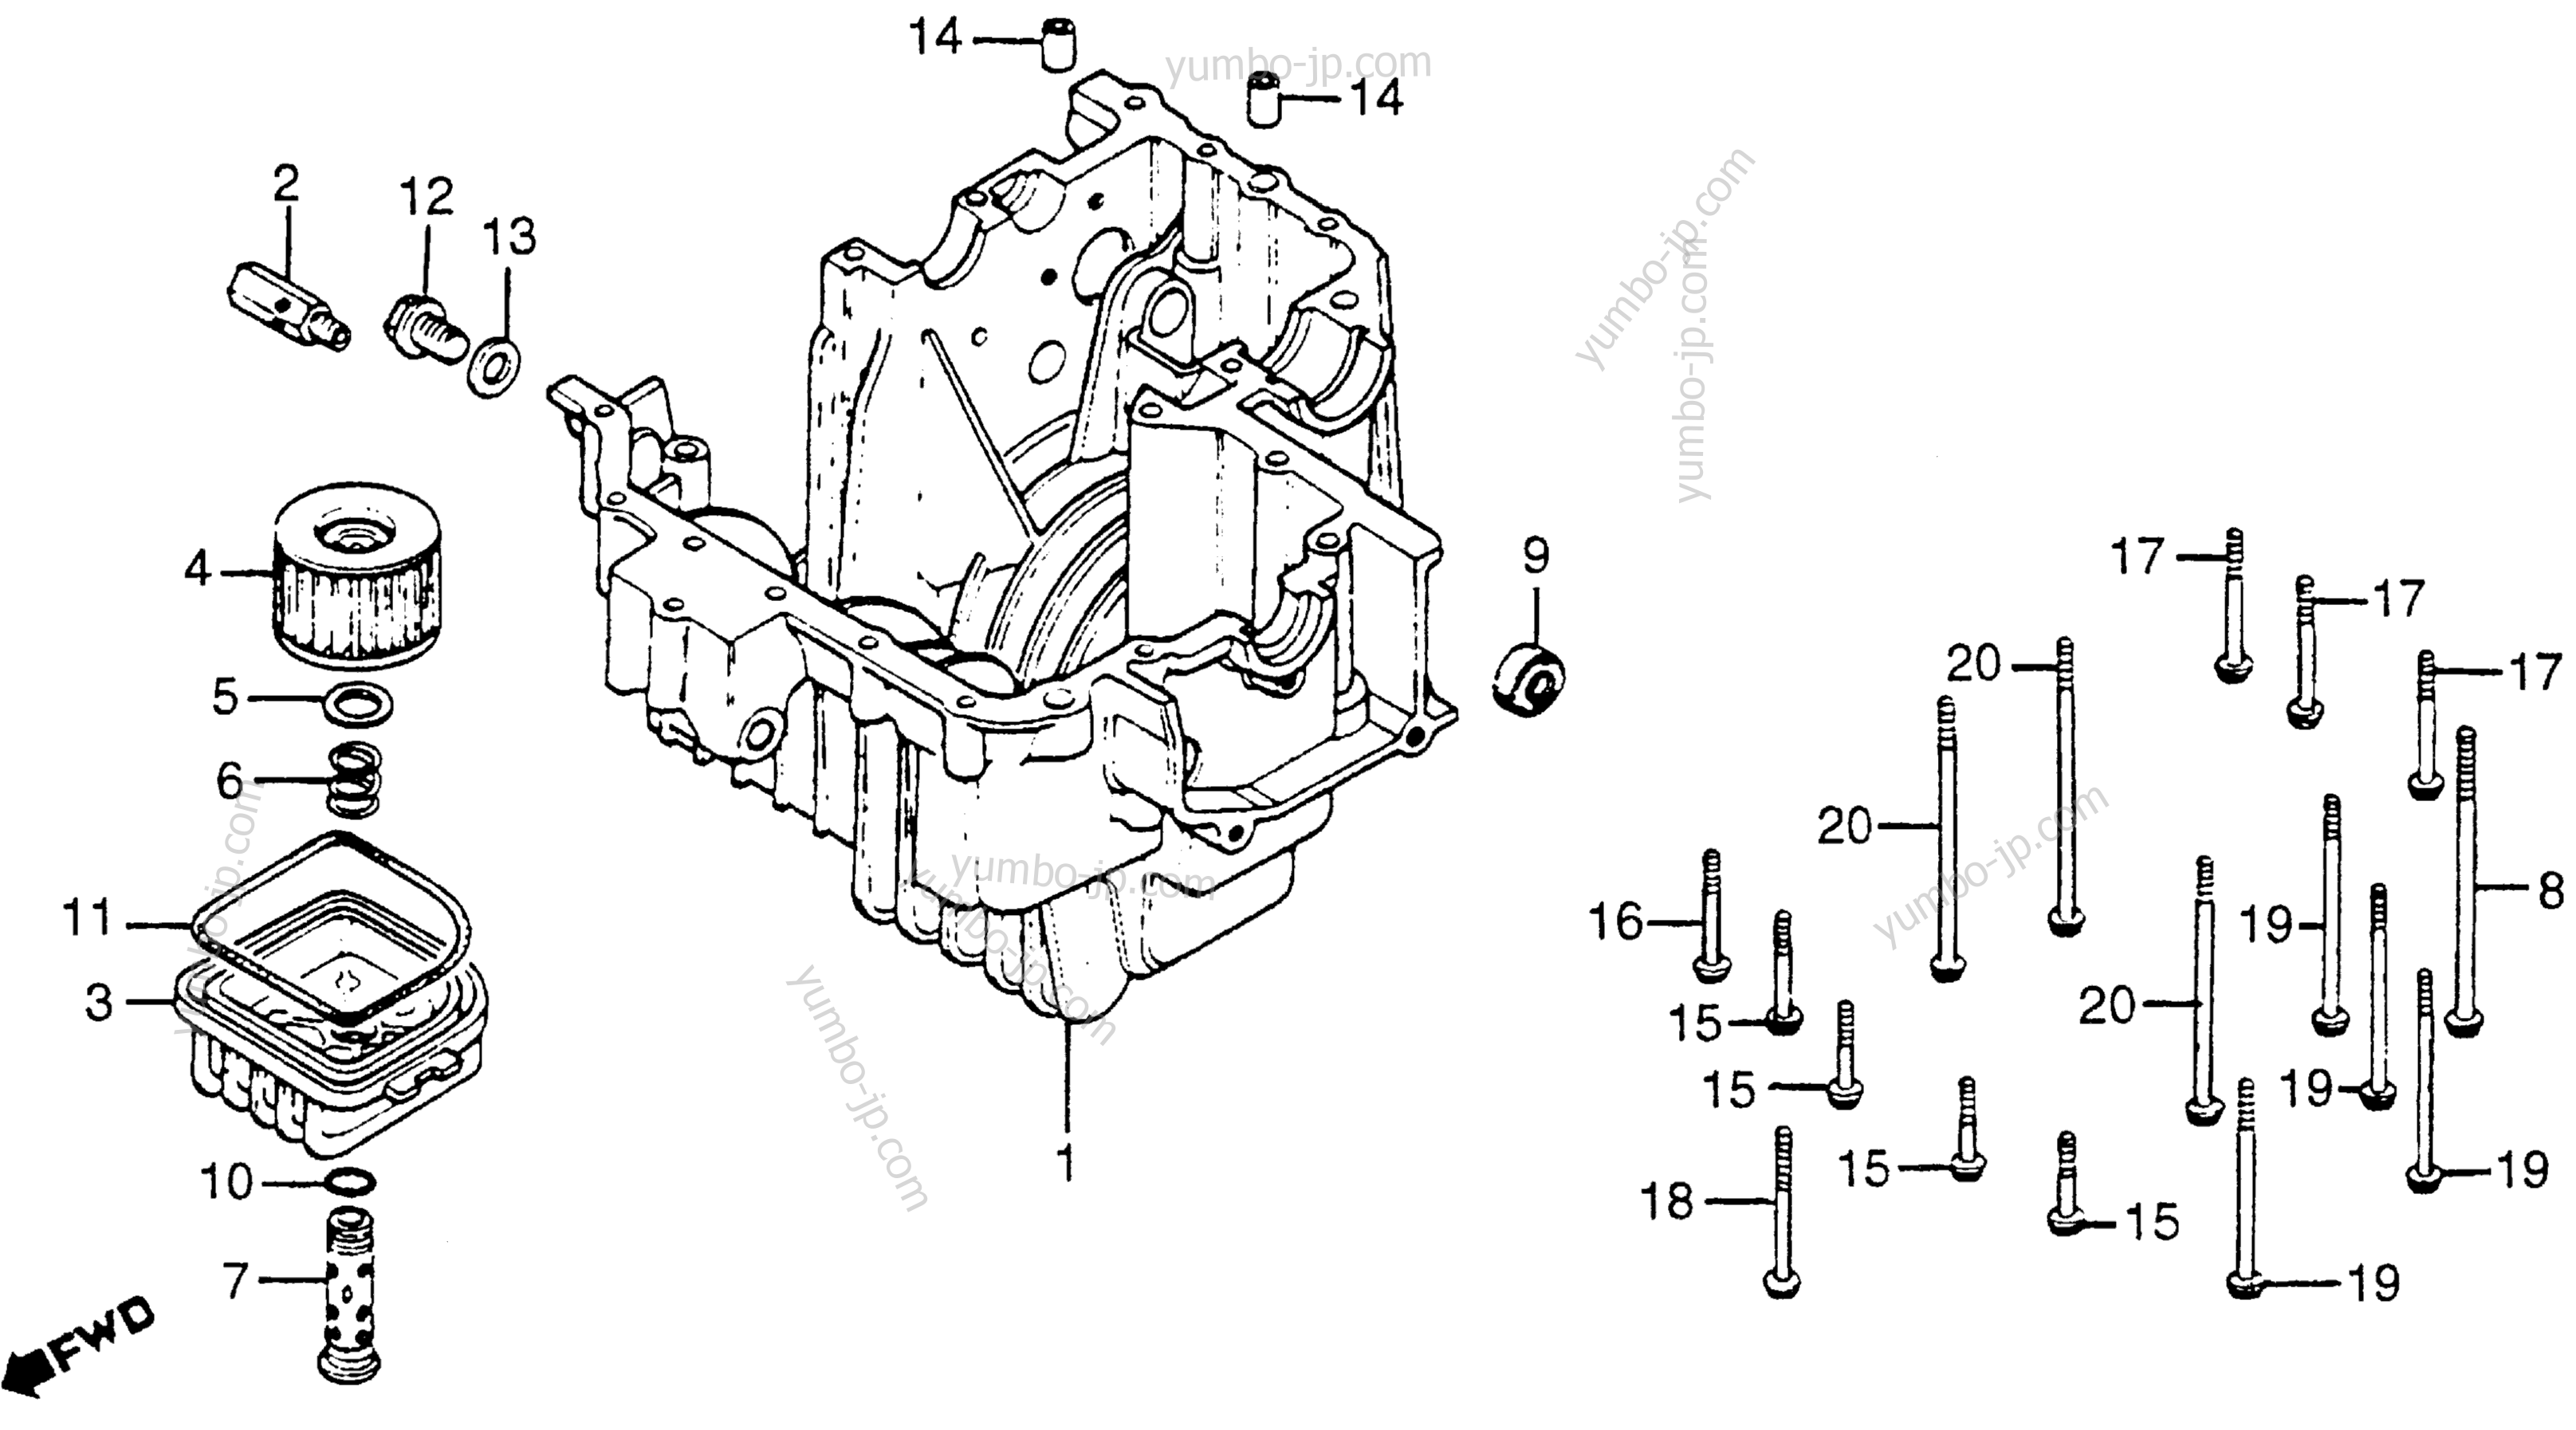 LOWER CRANKCASE for motorcycles HONDA CM400T A 1981 year